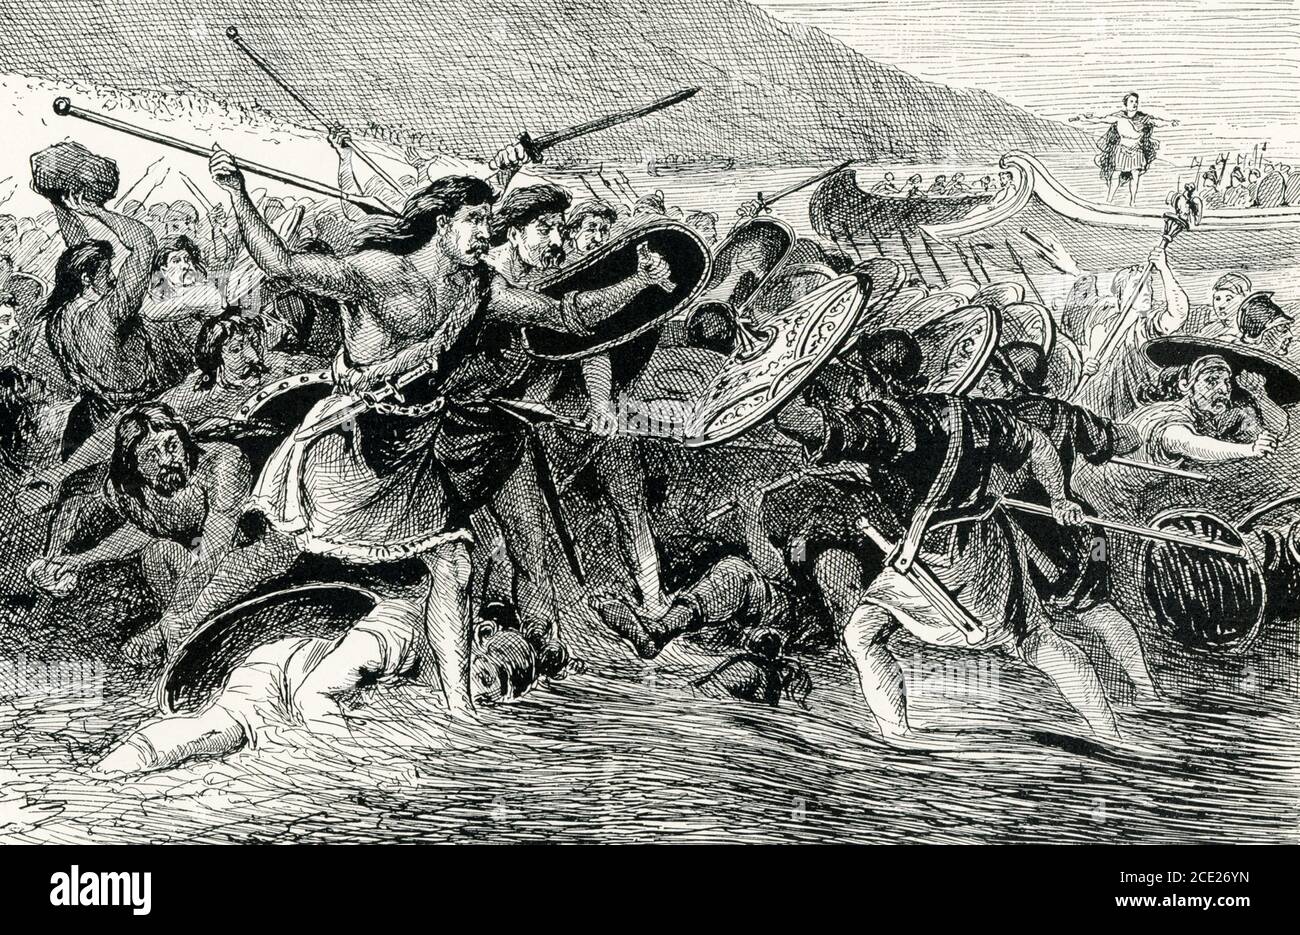 Caesar Landing in Britain. Julius Caesar carried Roman arms into wild regions where they had never penetrated before. The first historical notice we have of Britain is that in which Caesar himself tells of his invasion there in 55 B.C. The savage tribes rushed down to the shore to meet his soldiers, and charged even out into the water with spears and clubs, or coming barehanded, seized rocks and hurled them at the invaders. The desperate though unorganized resistance which he everywhere met prevented Caesar from making any lasting conquest of the brave islanders. Stock Photo